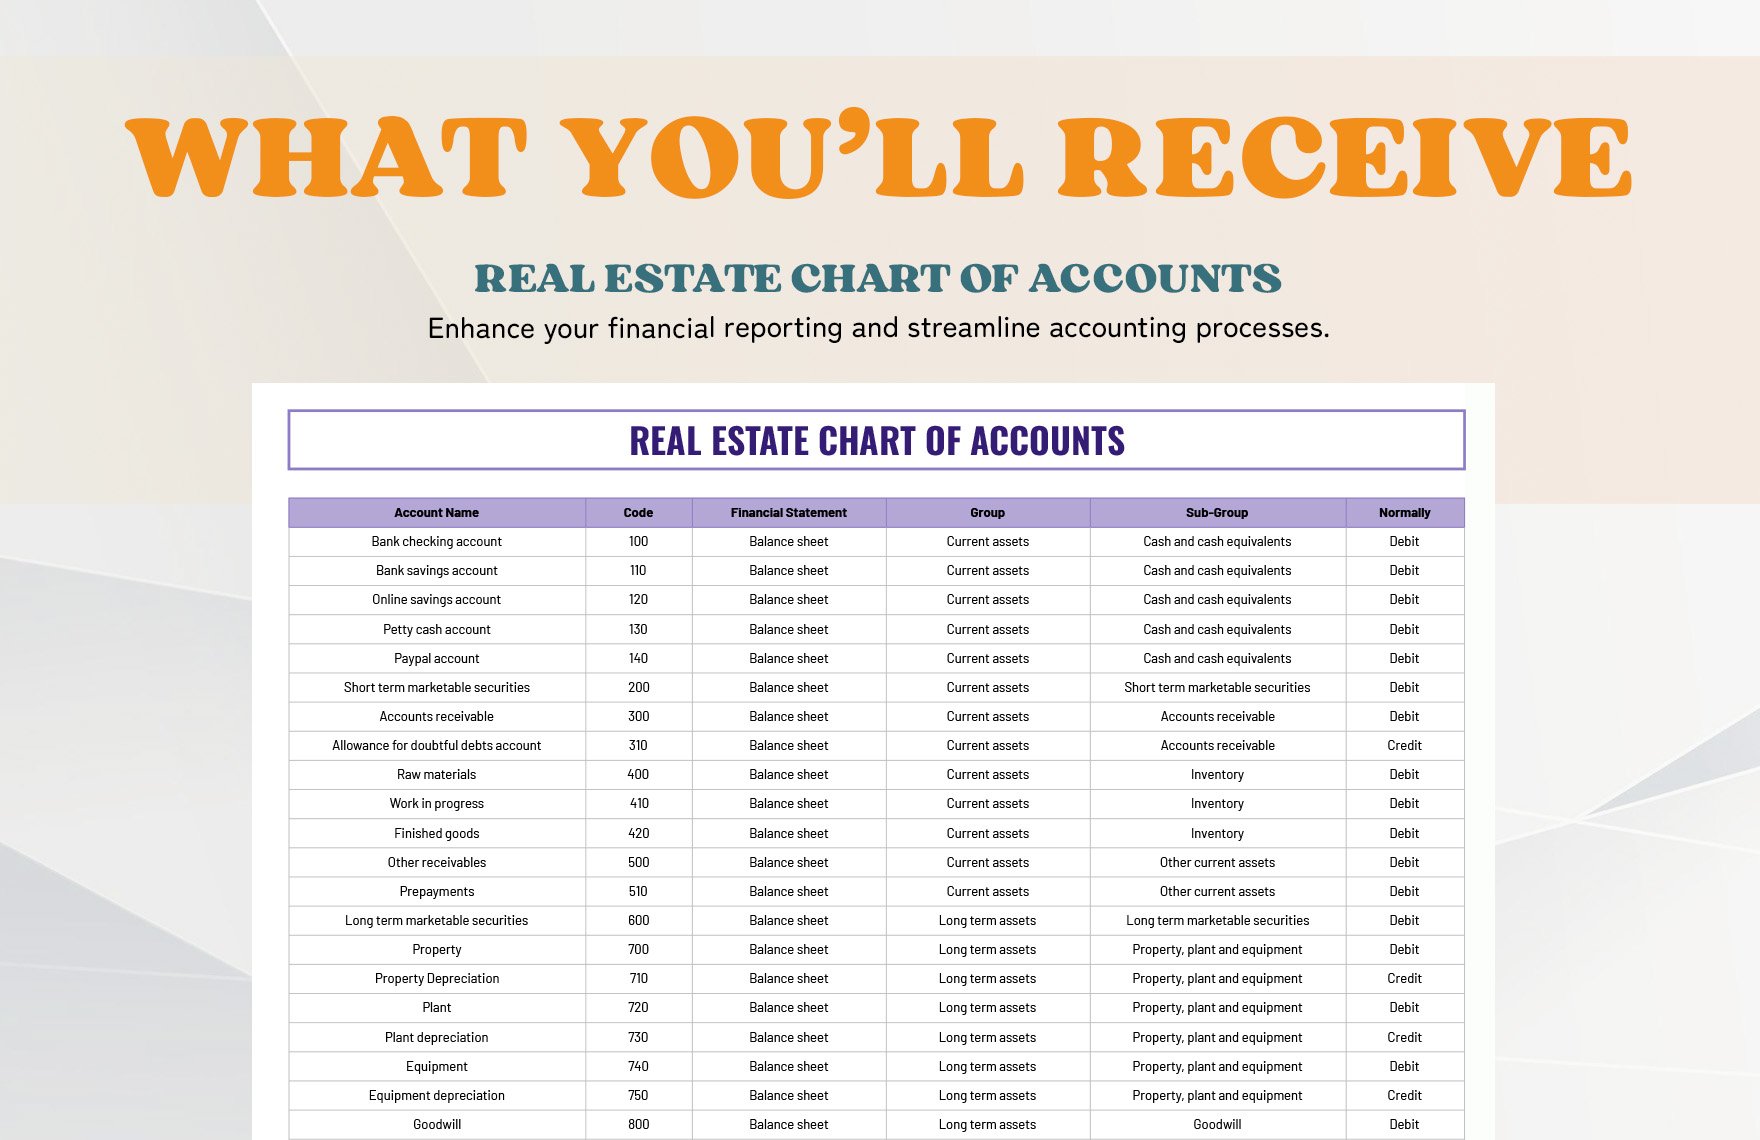 Real Estate Chart of Accounts Template